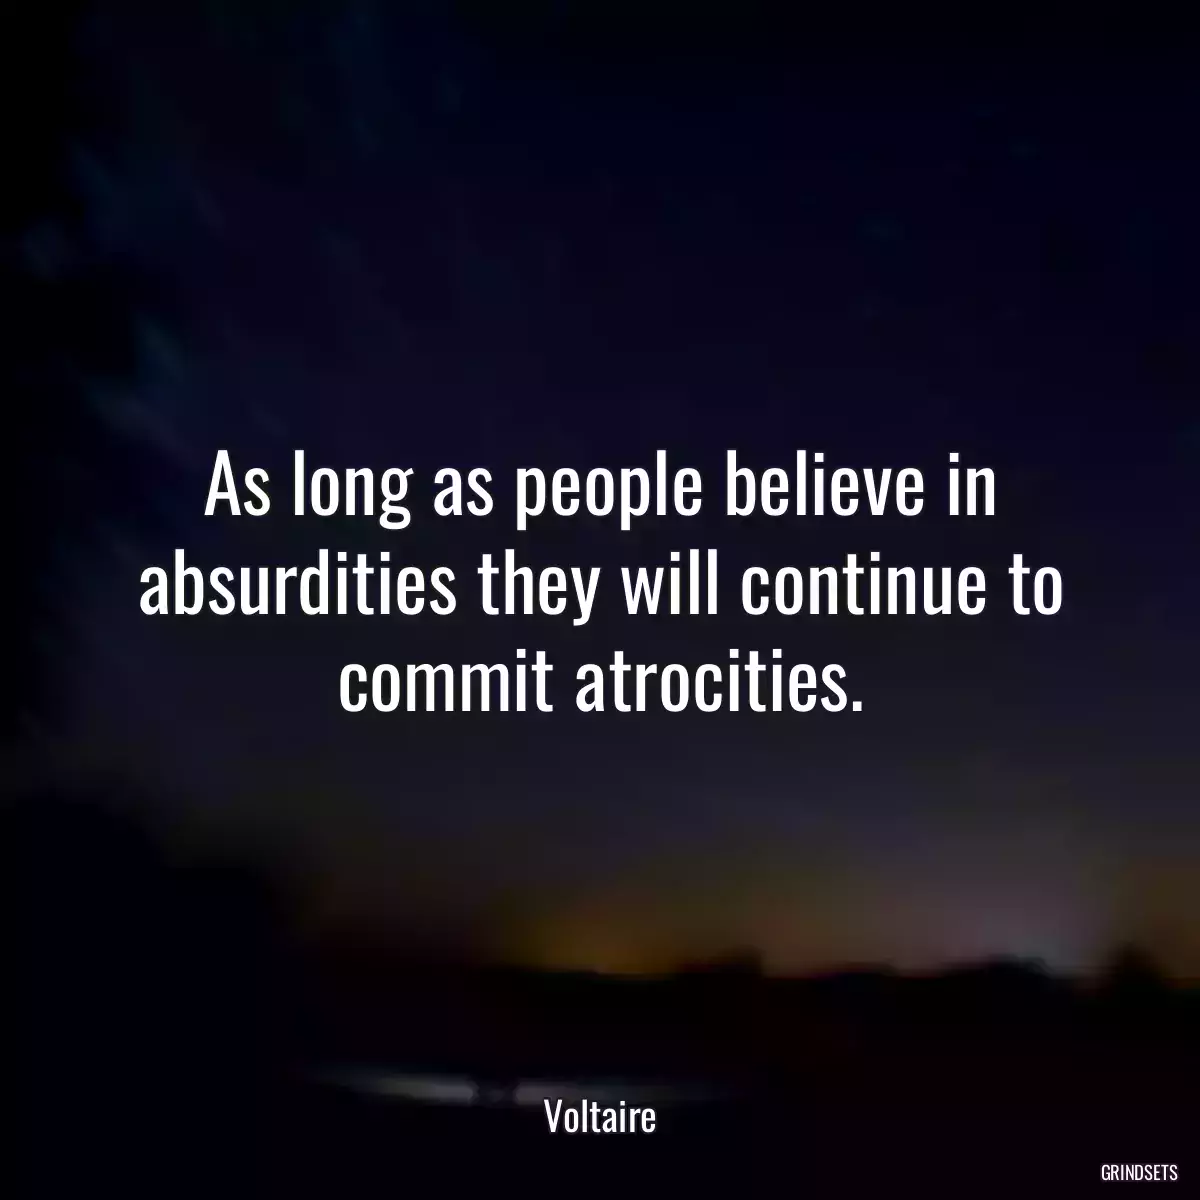 As long as people believe in absurdities they will continue to commit atrocities.